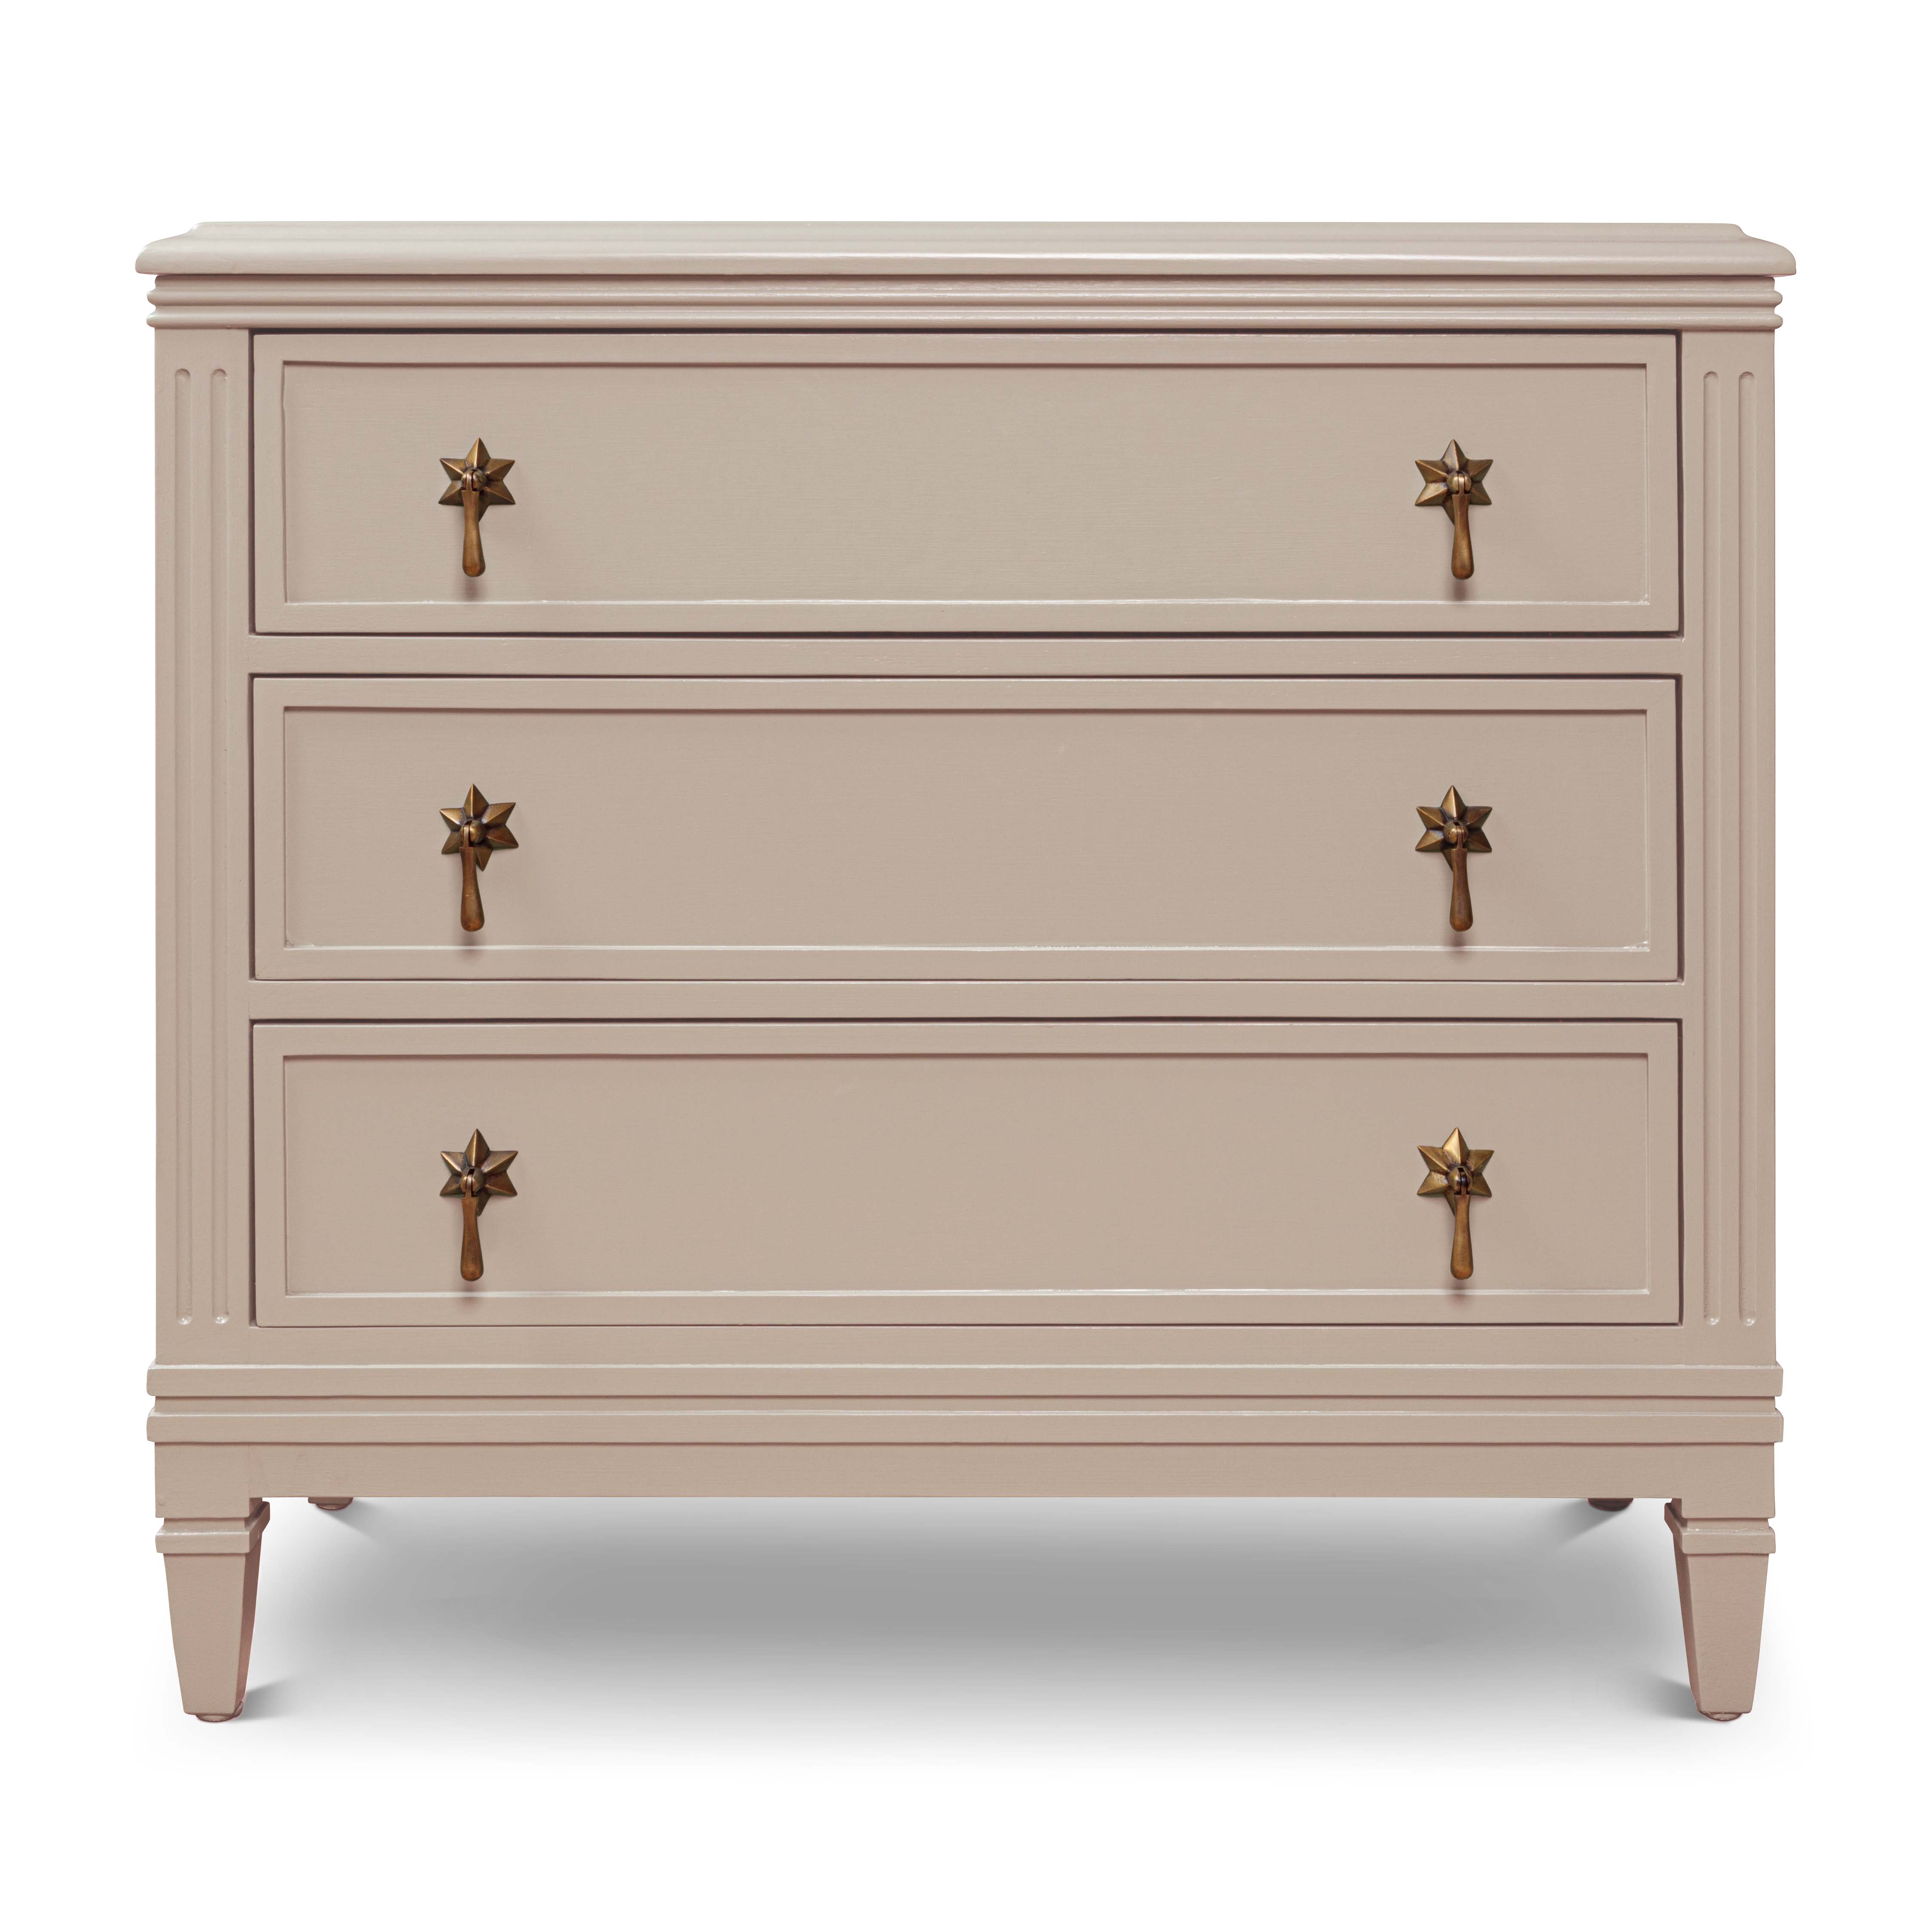 A ecru-coloured chest of drawers with three compartments, each with two star-shaped handles.